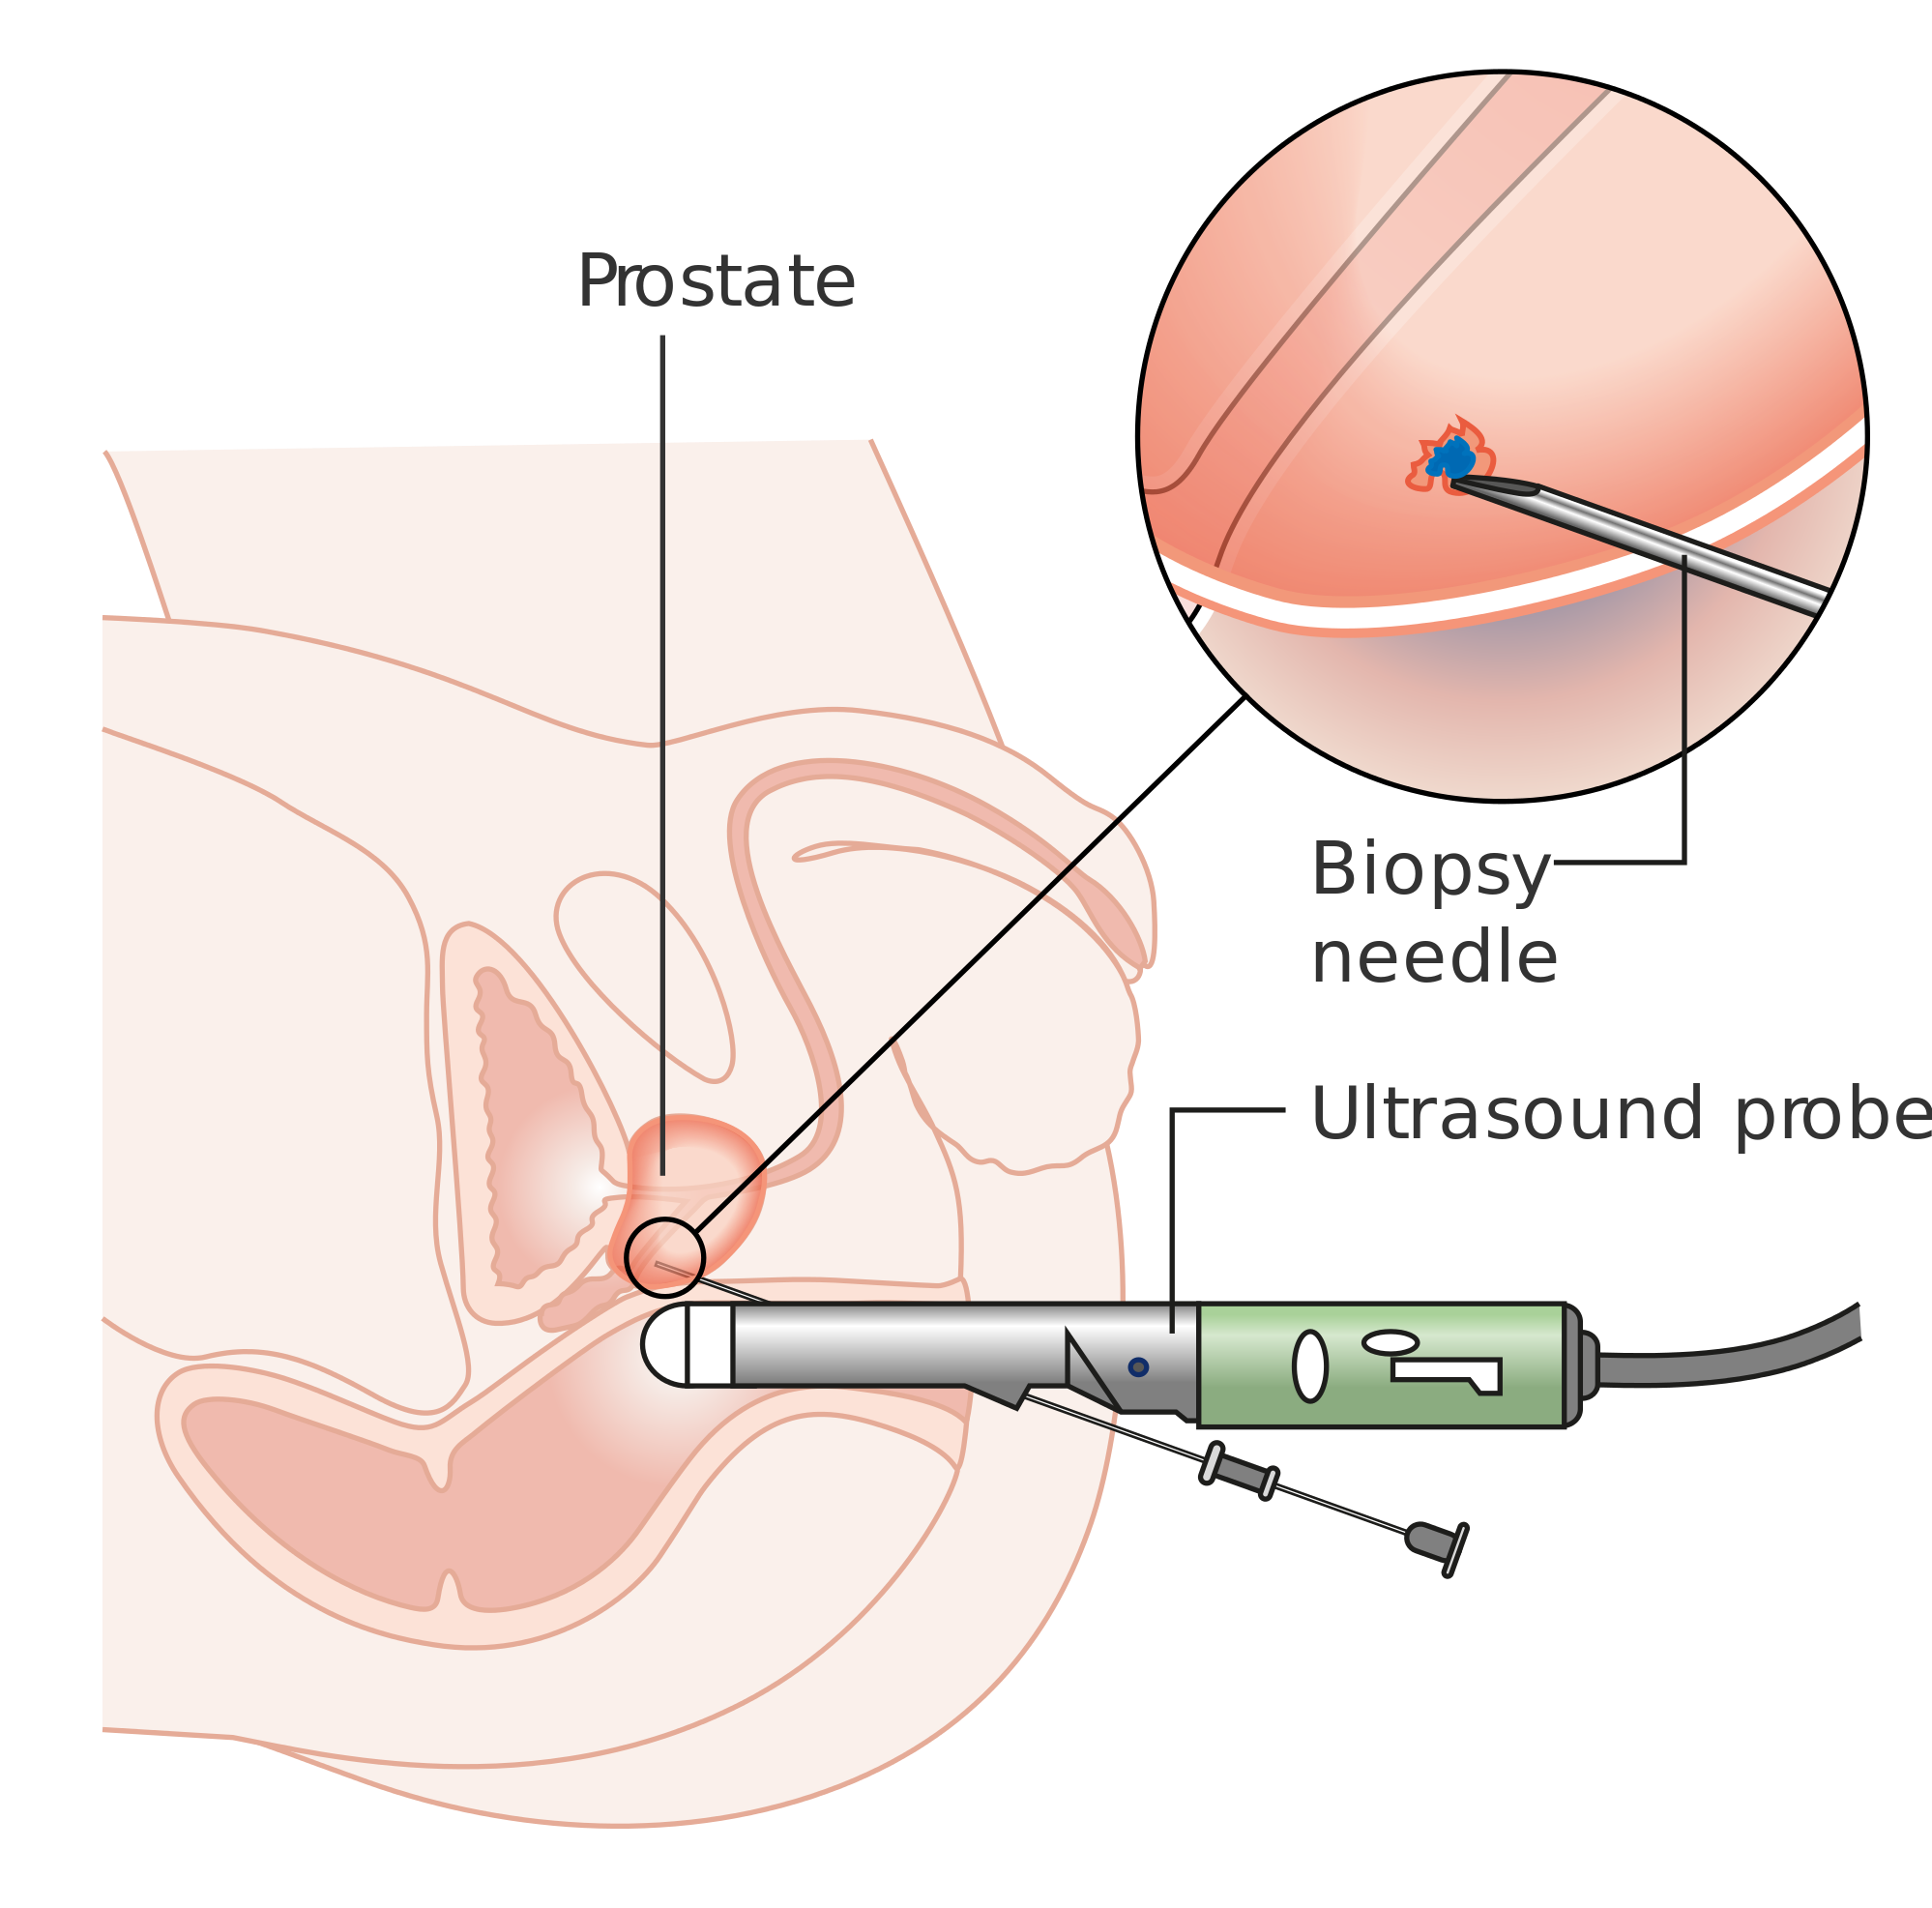 Prostate biopsy on Pain Management